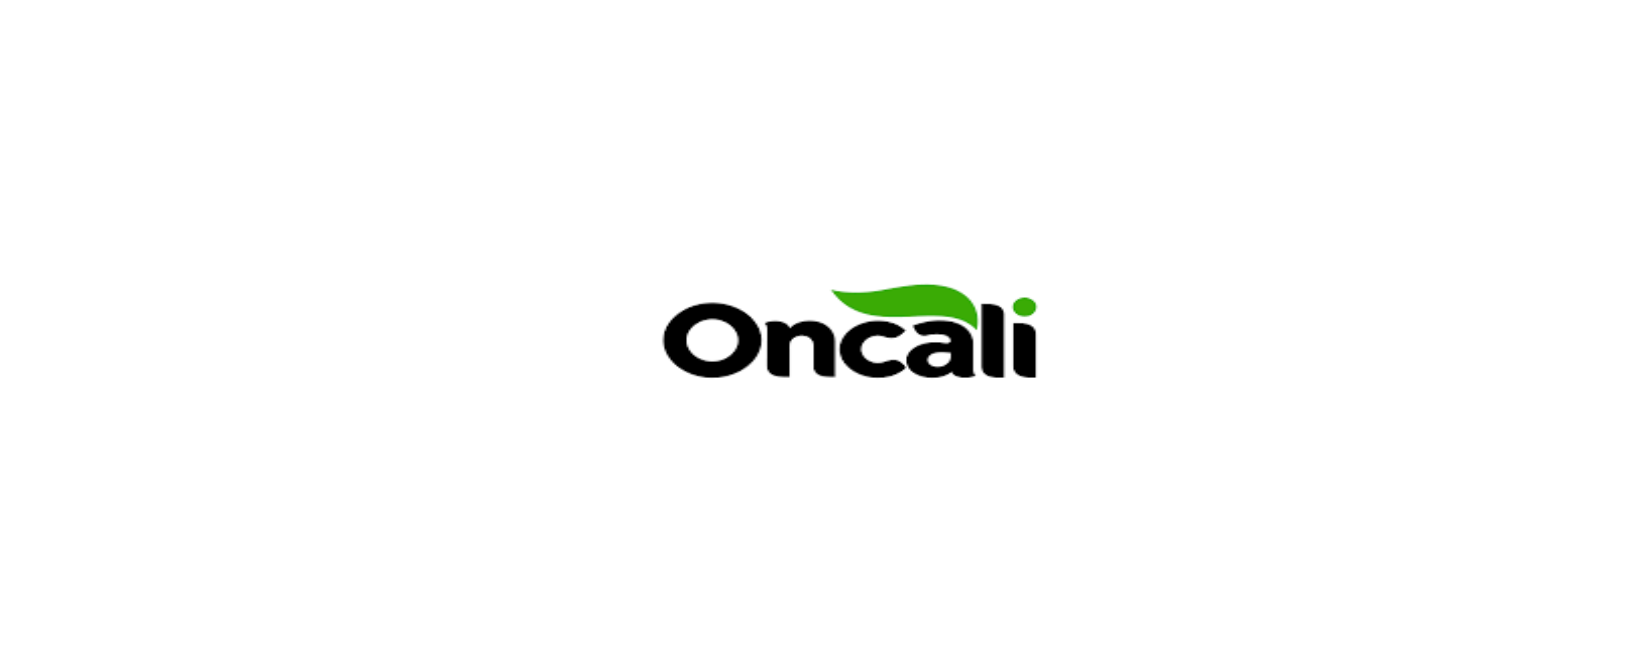 Oncali Discount Code 2022